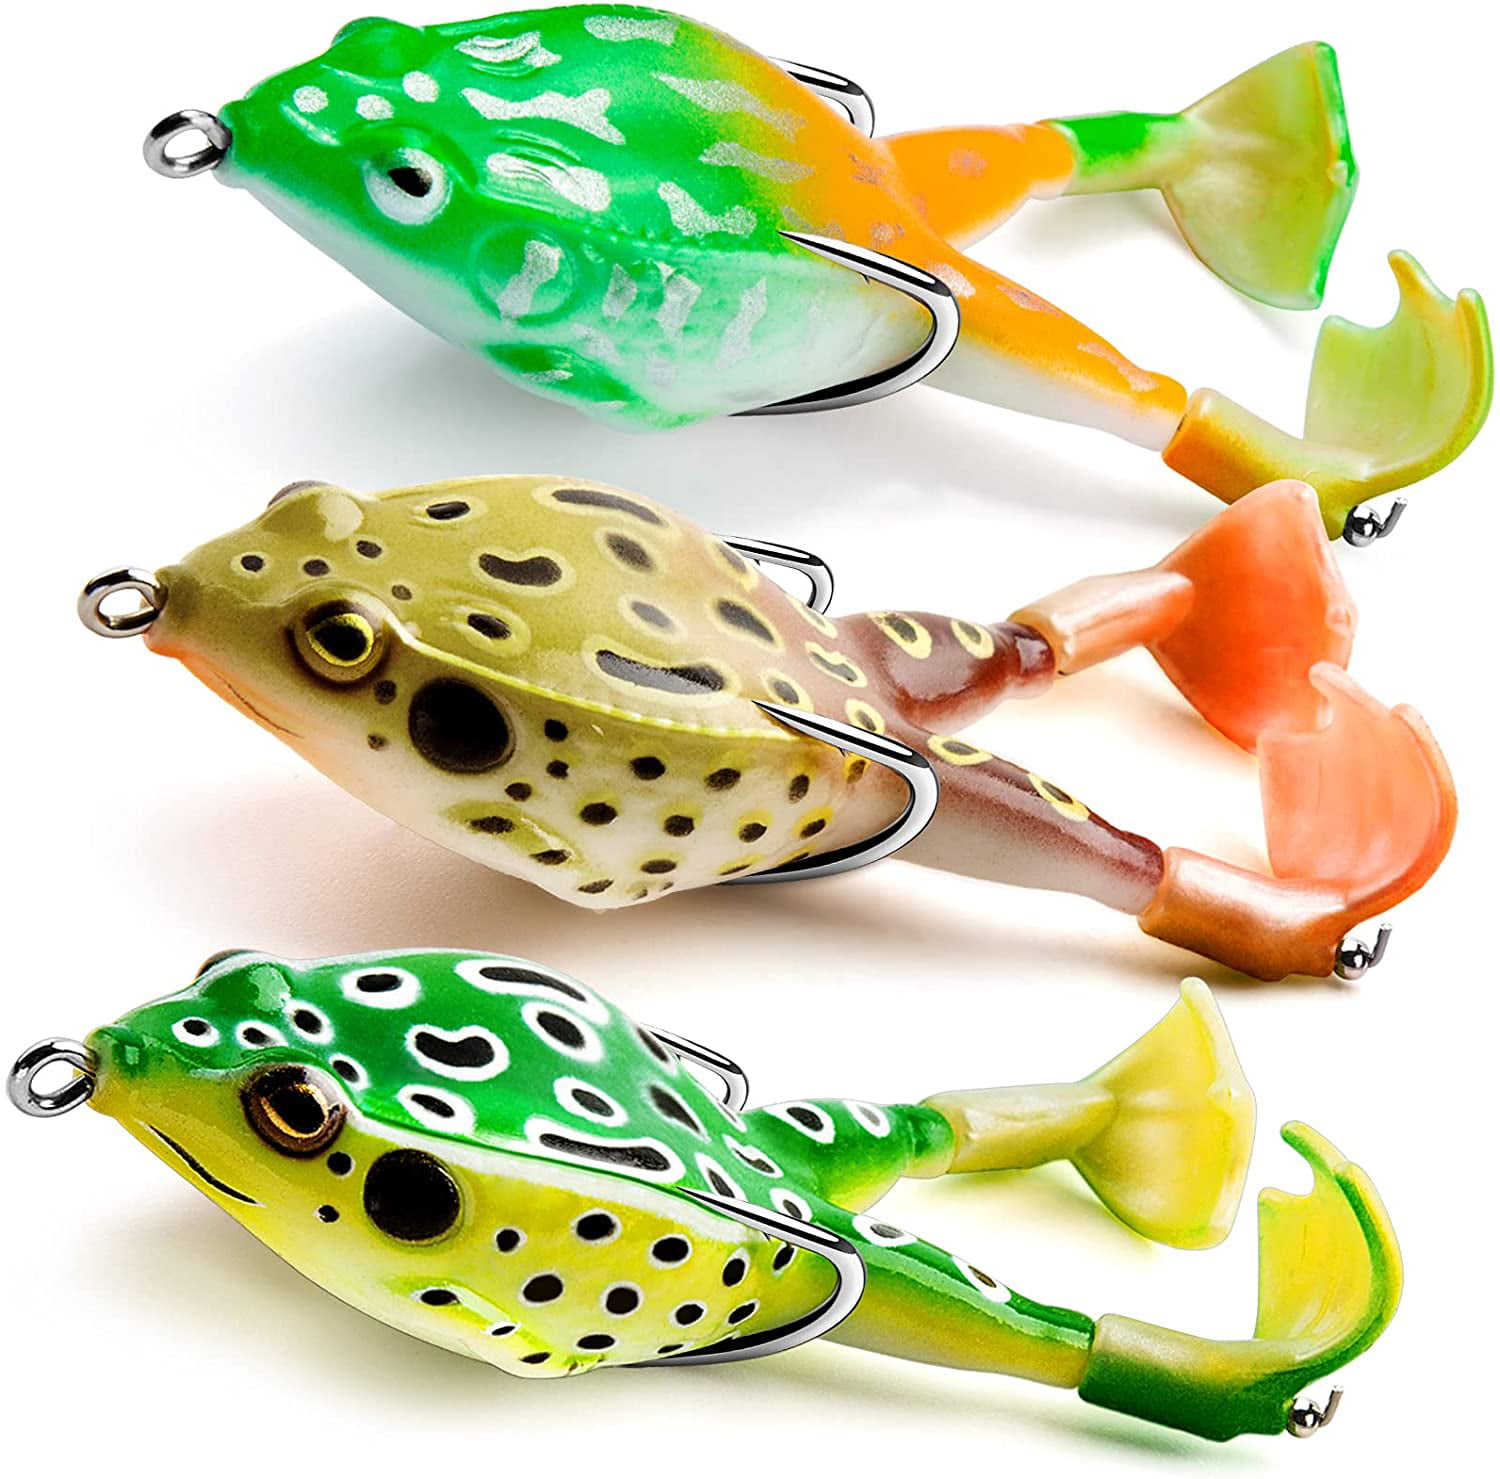 5pcs PVC Frog Fishing Lures Soft Baits Topwater for Bass Pike Perch Catfish 